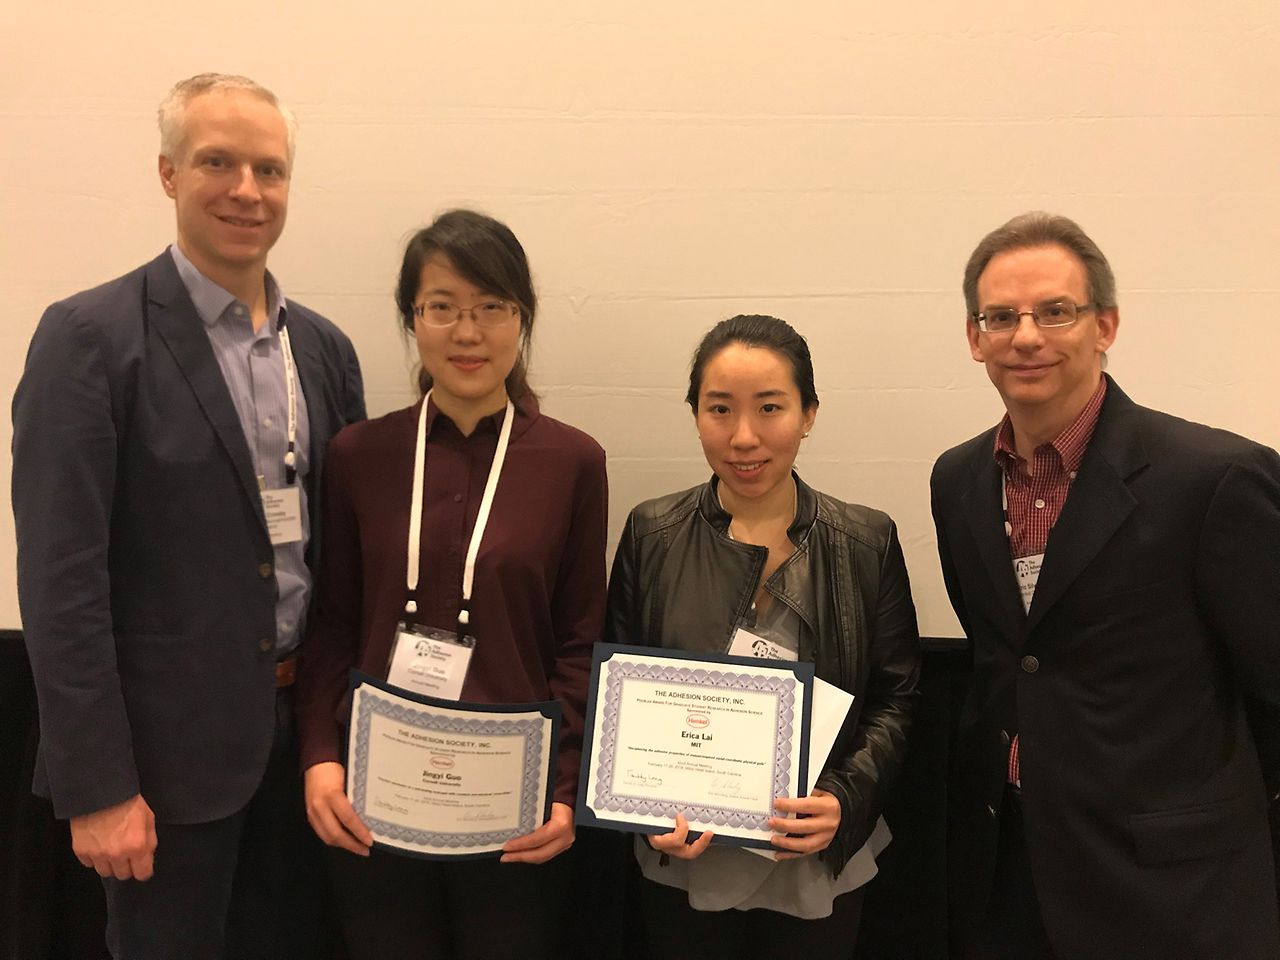 Professor Al Crosby (left) and Henkel’s Eric Silverberg presented the awards at the annual meeting of the Adhesion Society to (L to R) Jingyi Guo and Erika Lai.